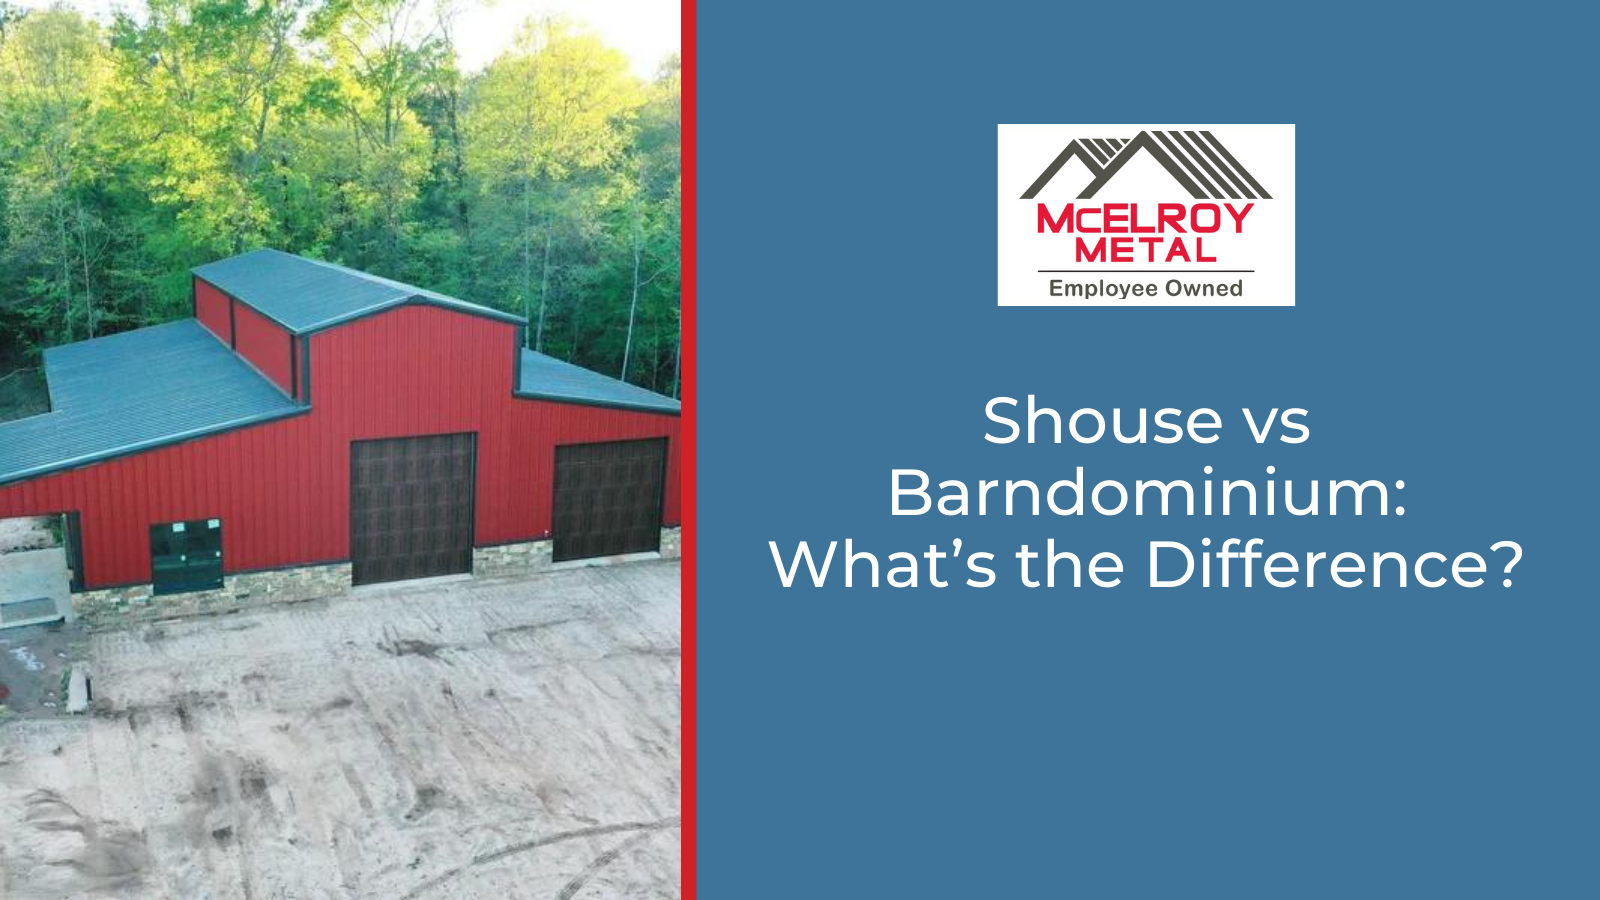 Shouse vs Barndominium: What’s the Difference?